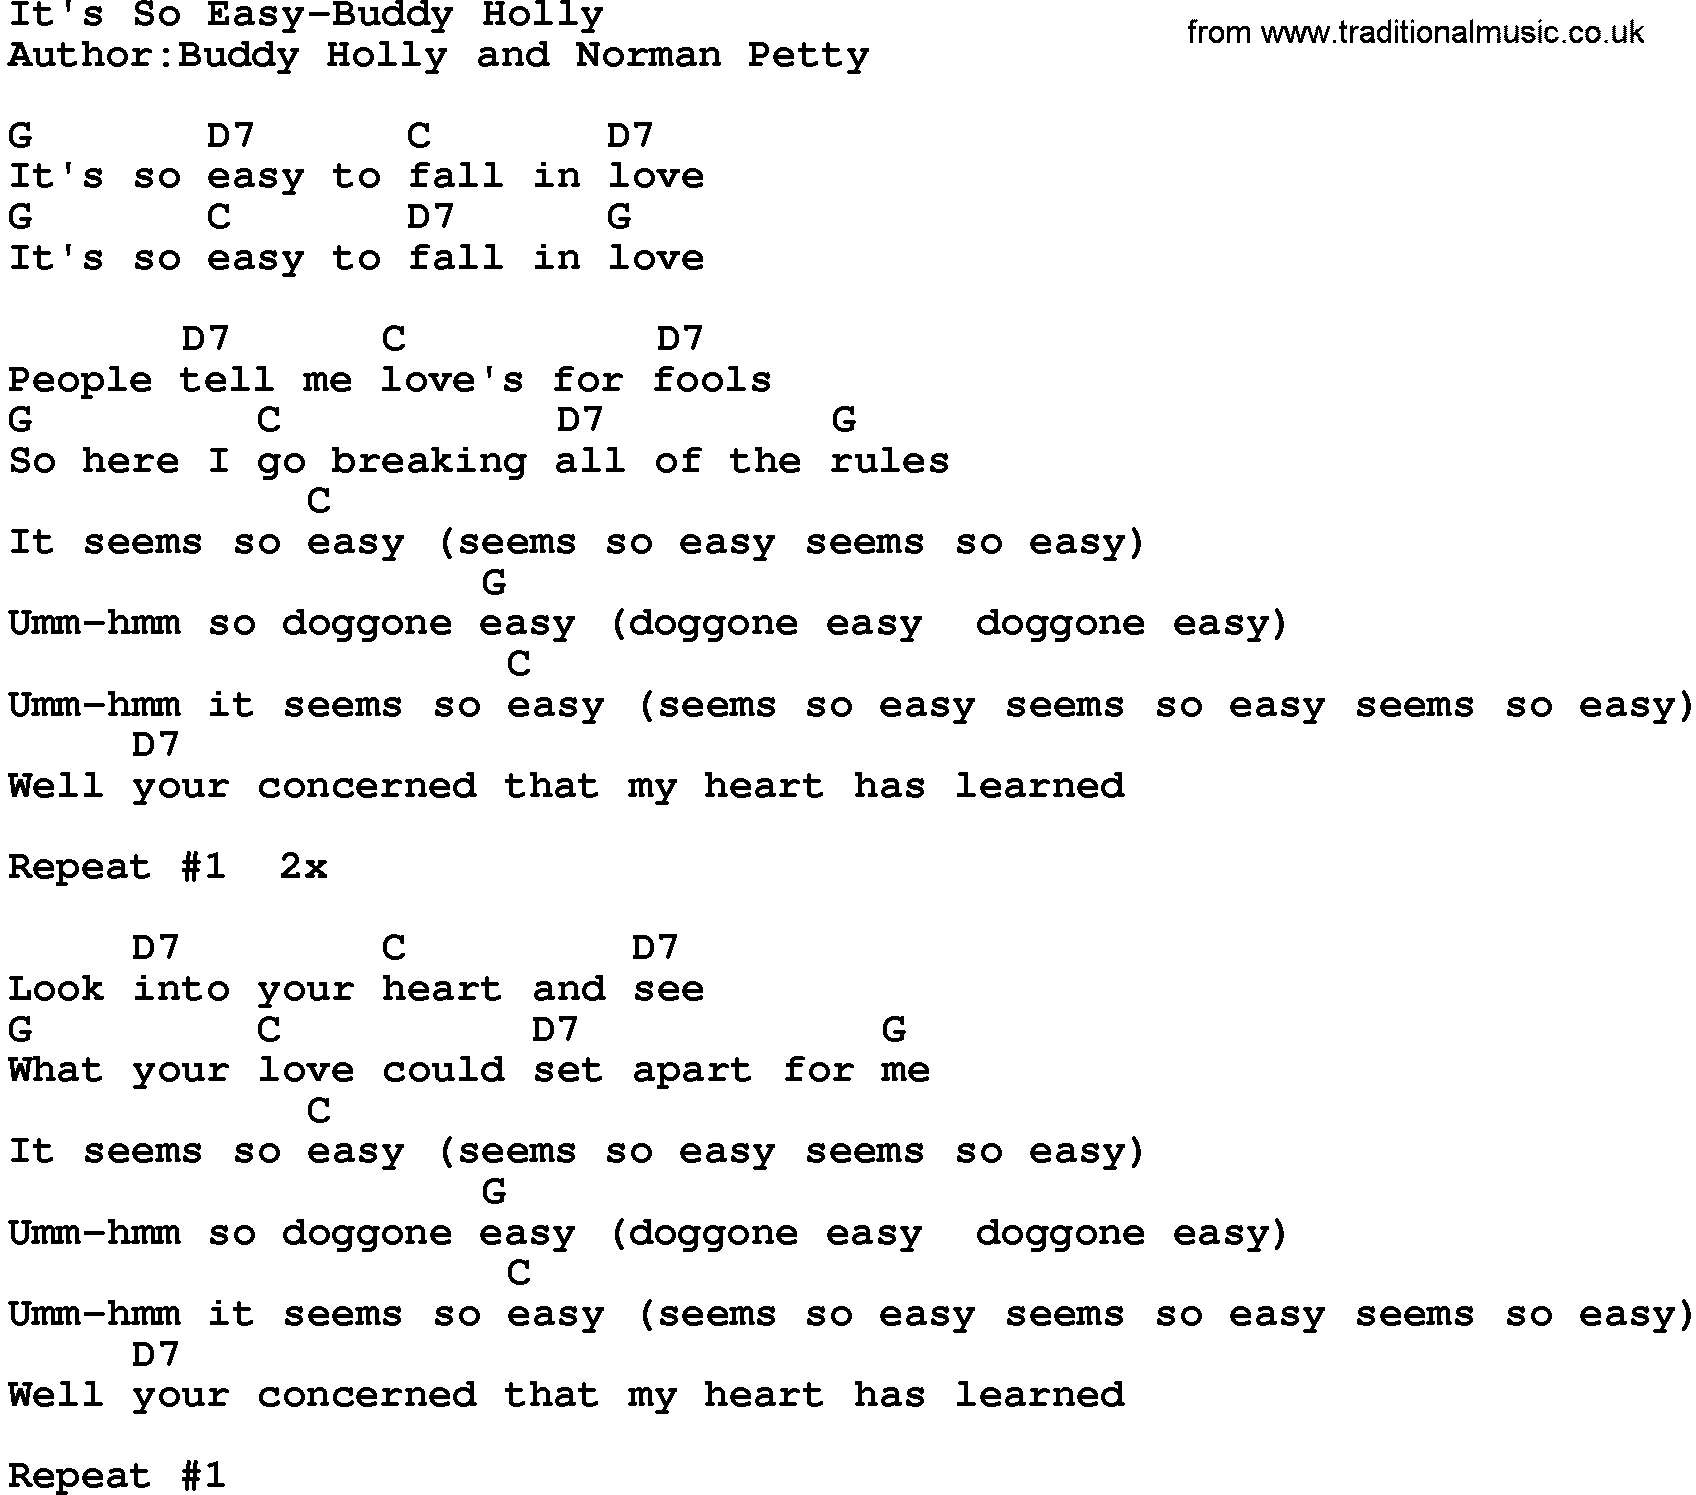 Country music song: It's So Easy-Buddy Holly lyrics and chords